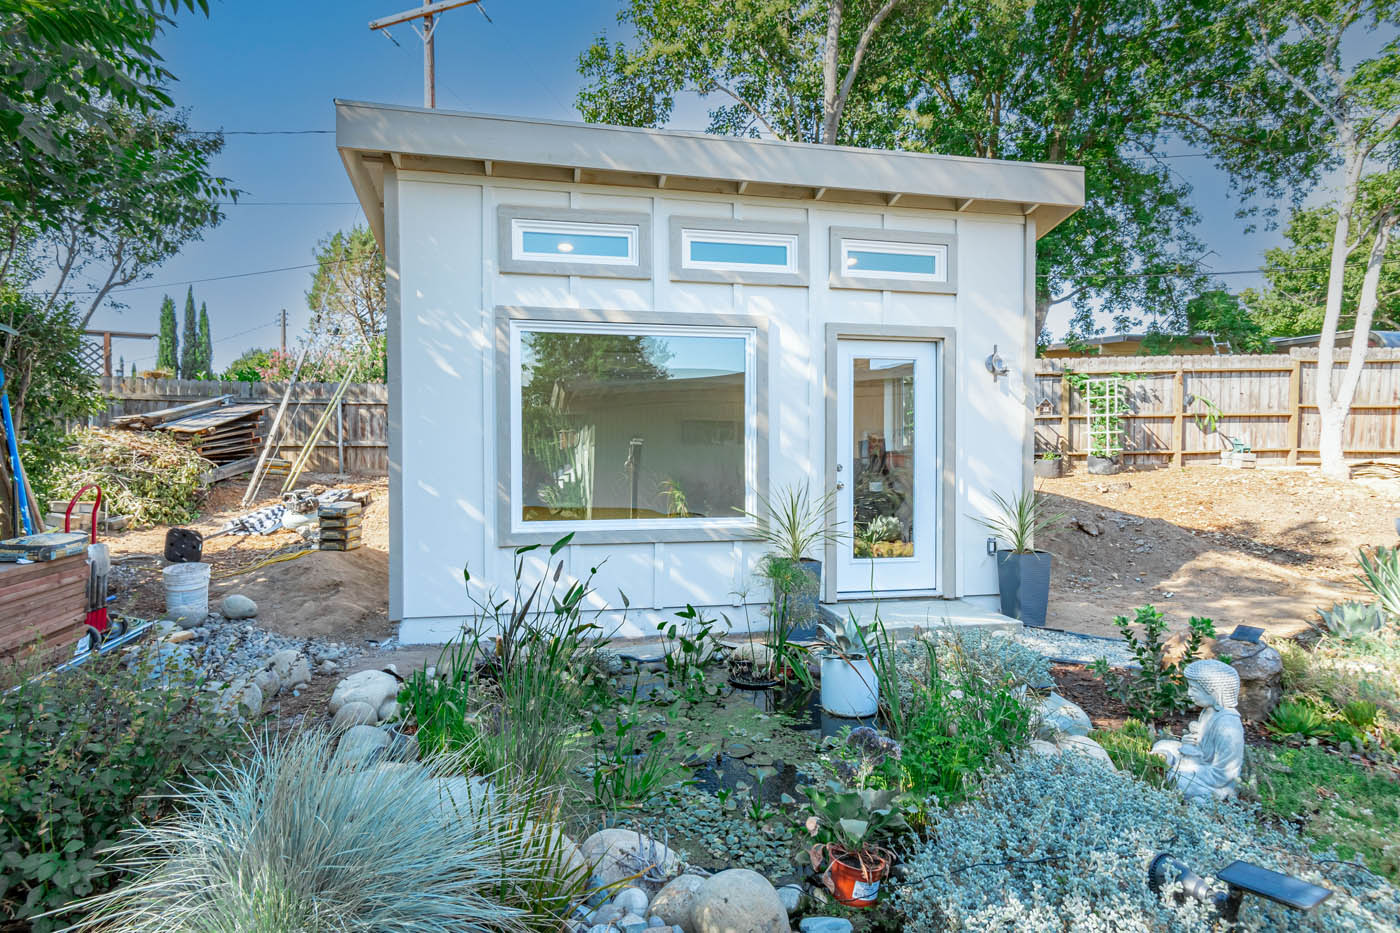 A Tucson detached ADU in a California backyard by a pool, learn more about our best tiny home builder in Tucson.